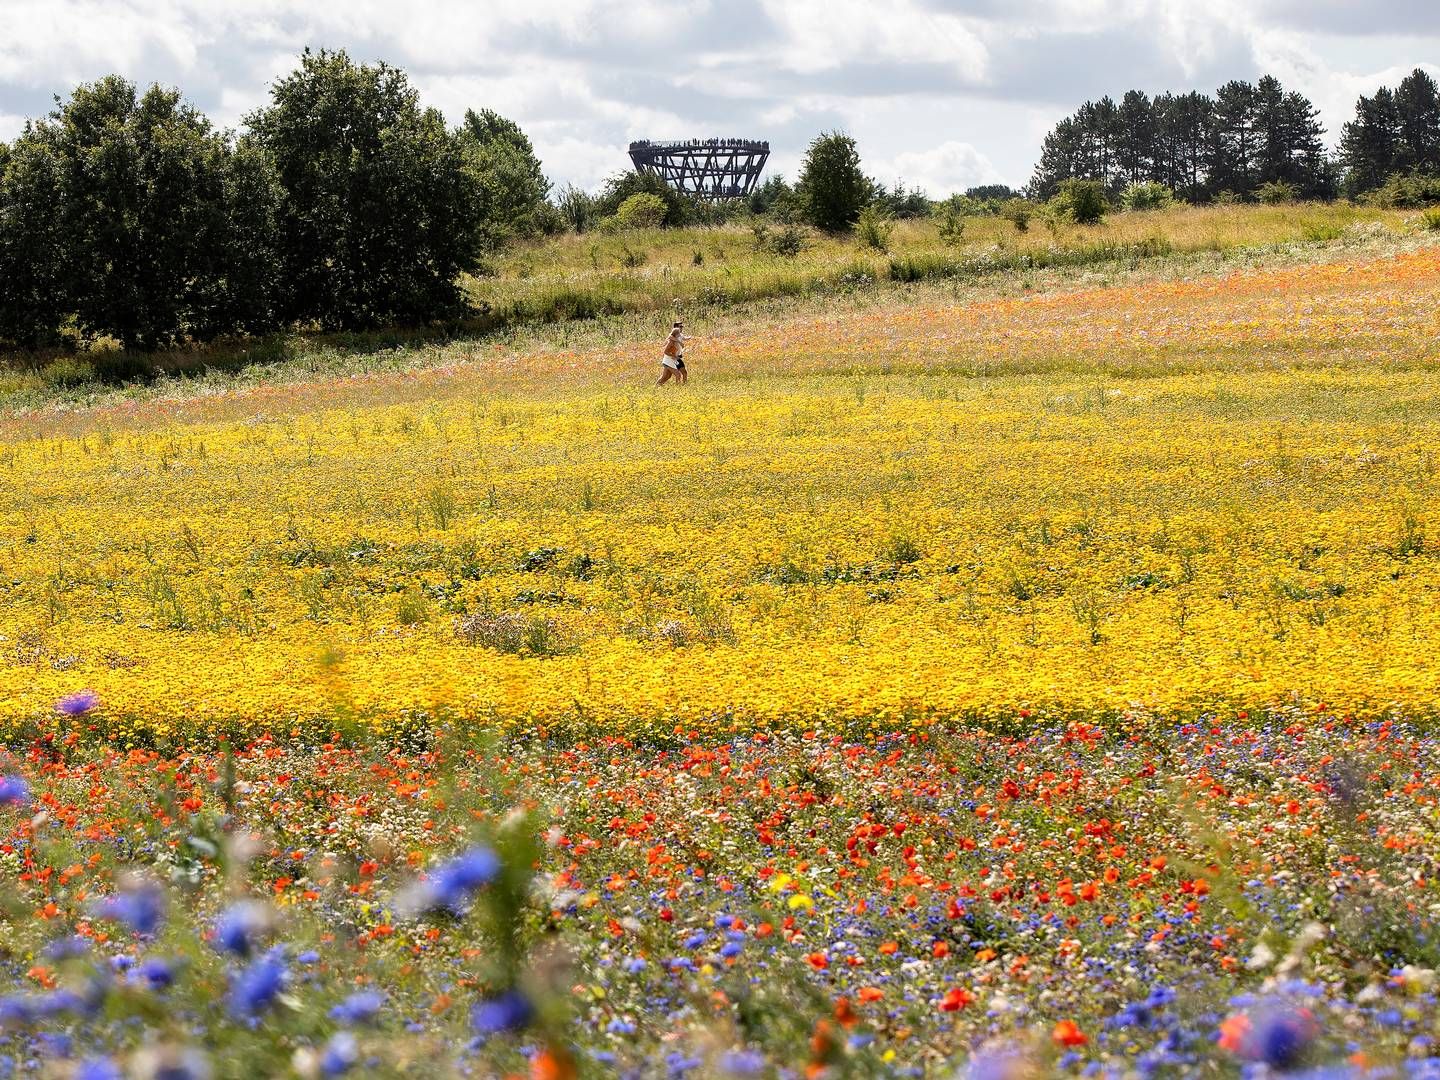 Biodiversity is a major focus area for many pension funds. Flower fields, like the one shown here near Danish town Haslev in Denmark can create more biodiversity, wild nature and allow bees, insects and butterflies to feed. | Foto: Finn Frandsen/Ritzau Scanpix